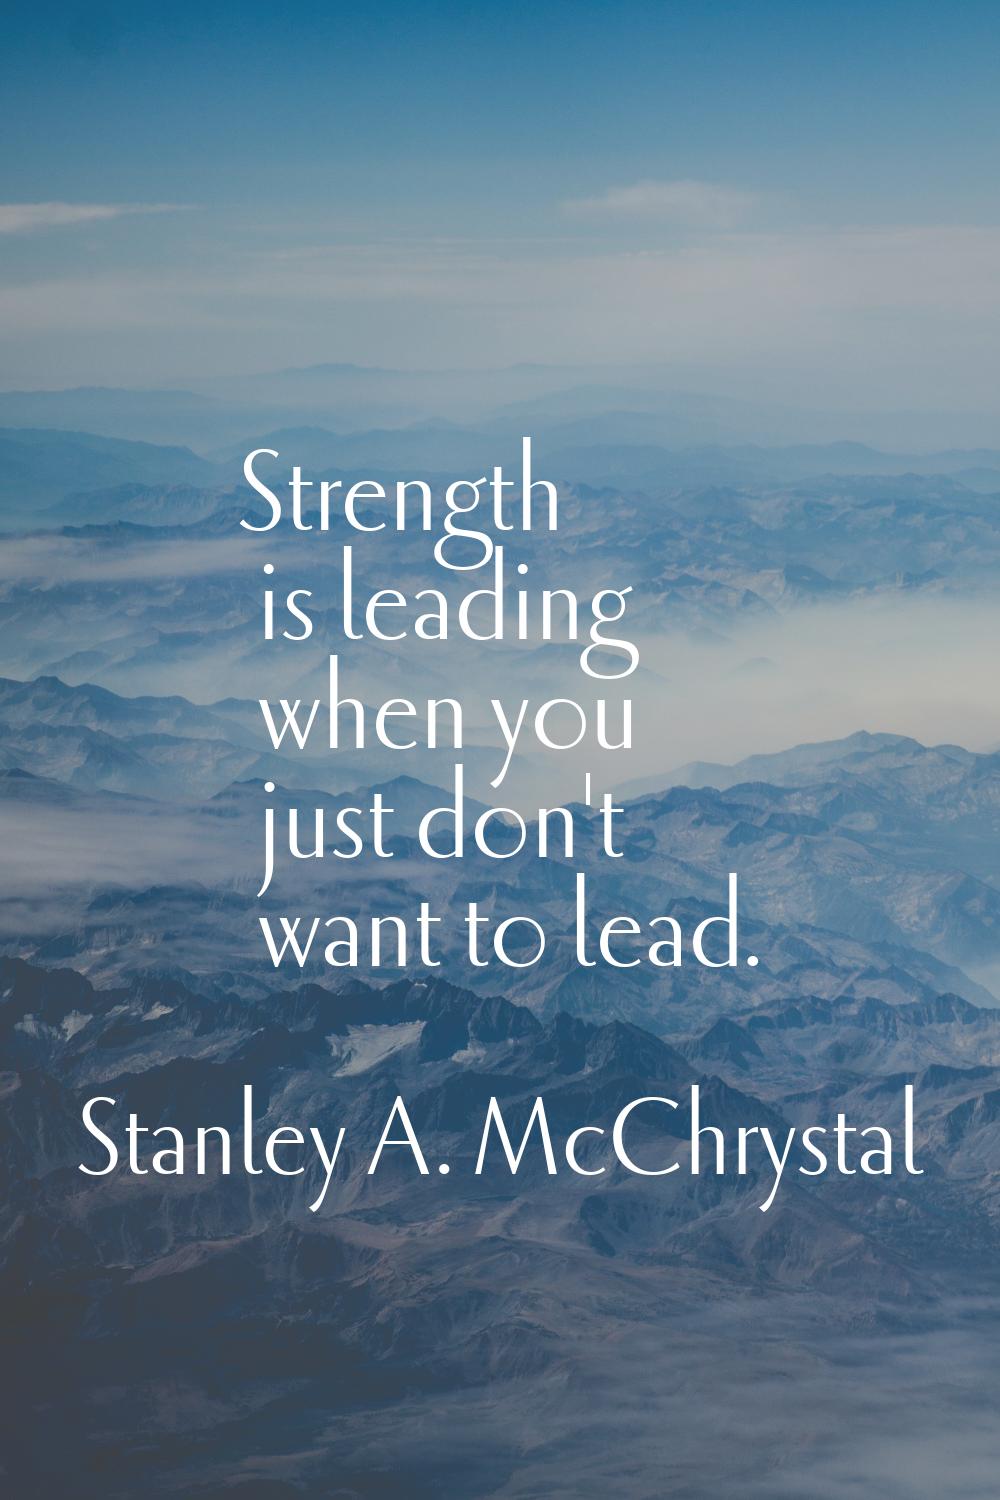 Strength is leading when you just don't want to lead.